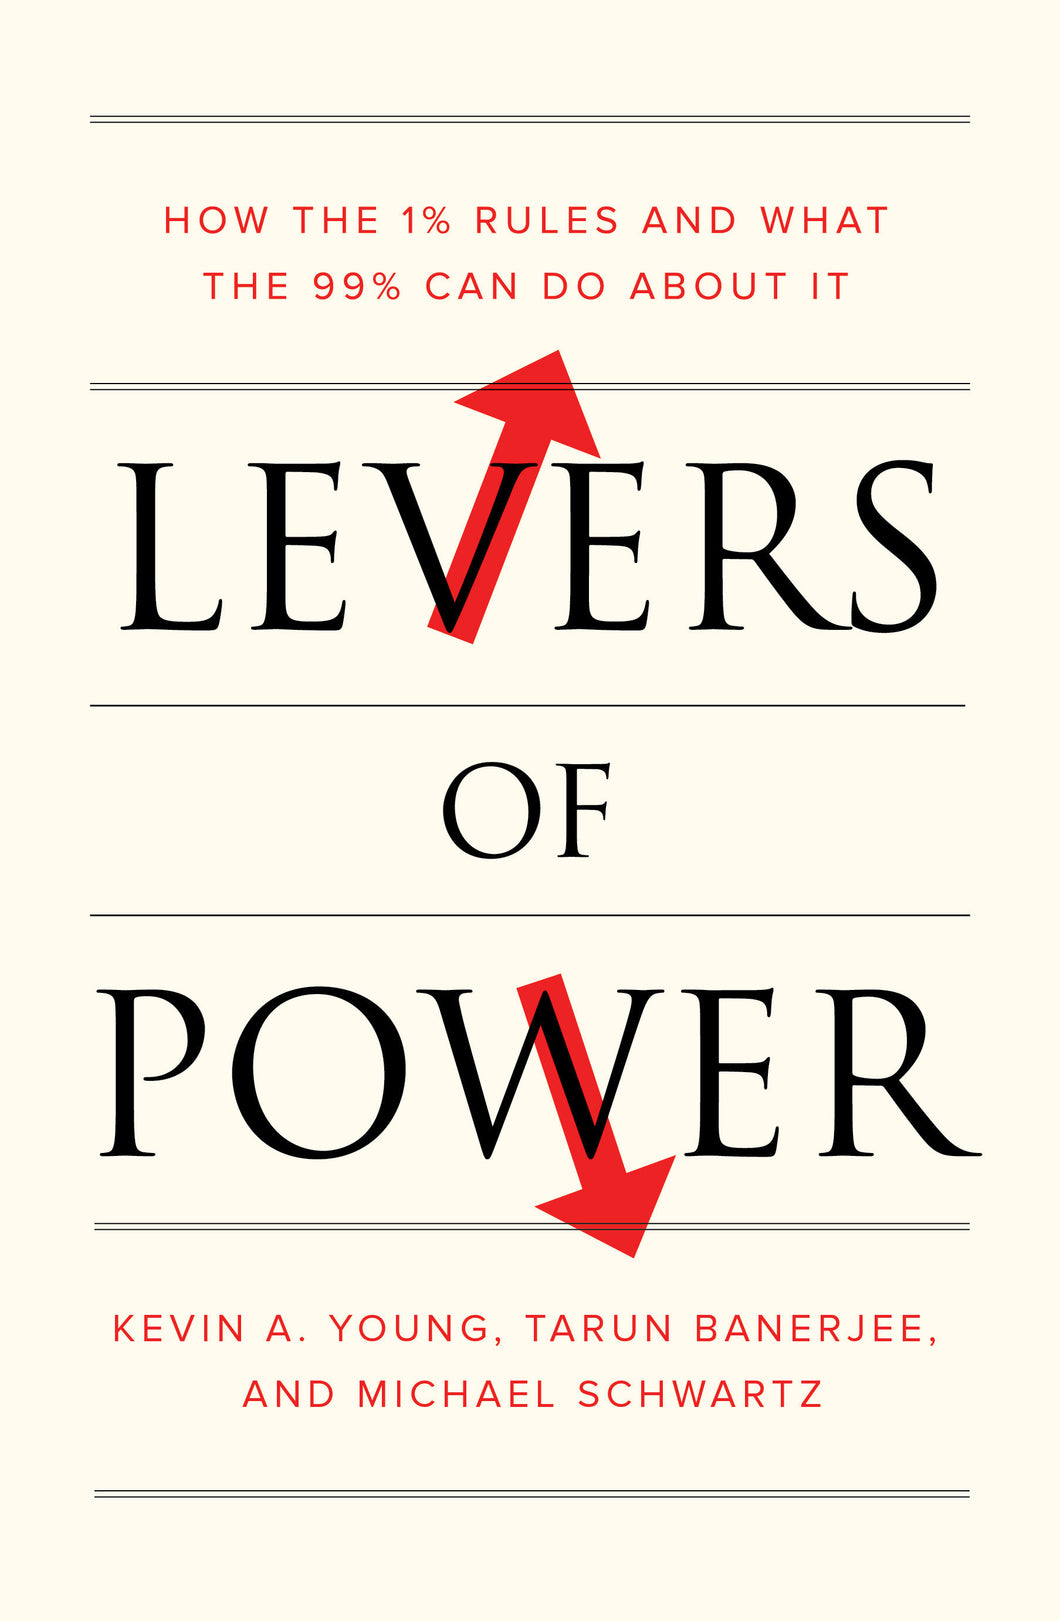 Levers of Power: How the 1% Rules and What the 99% Can Do About It